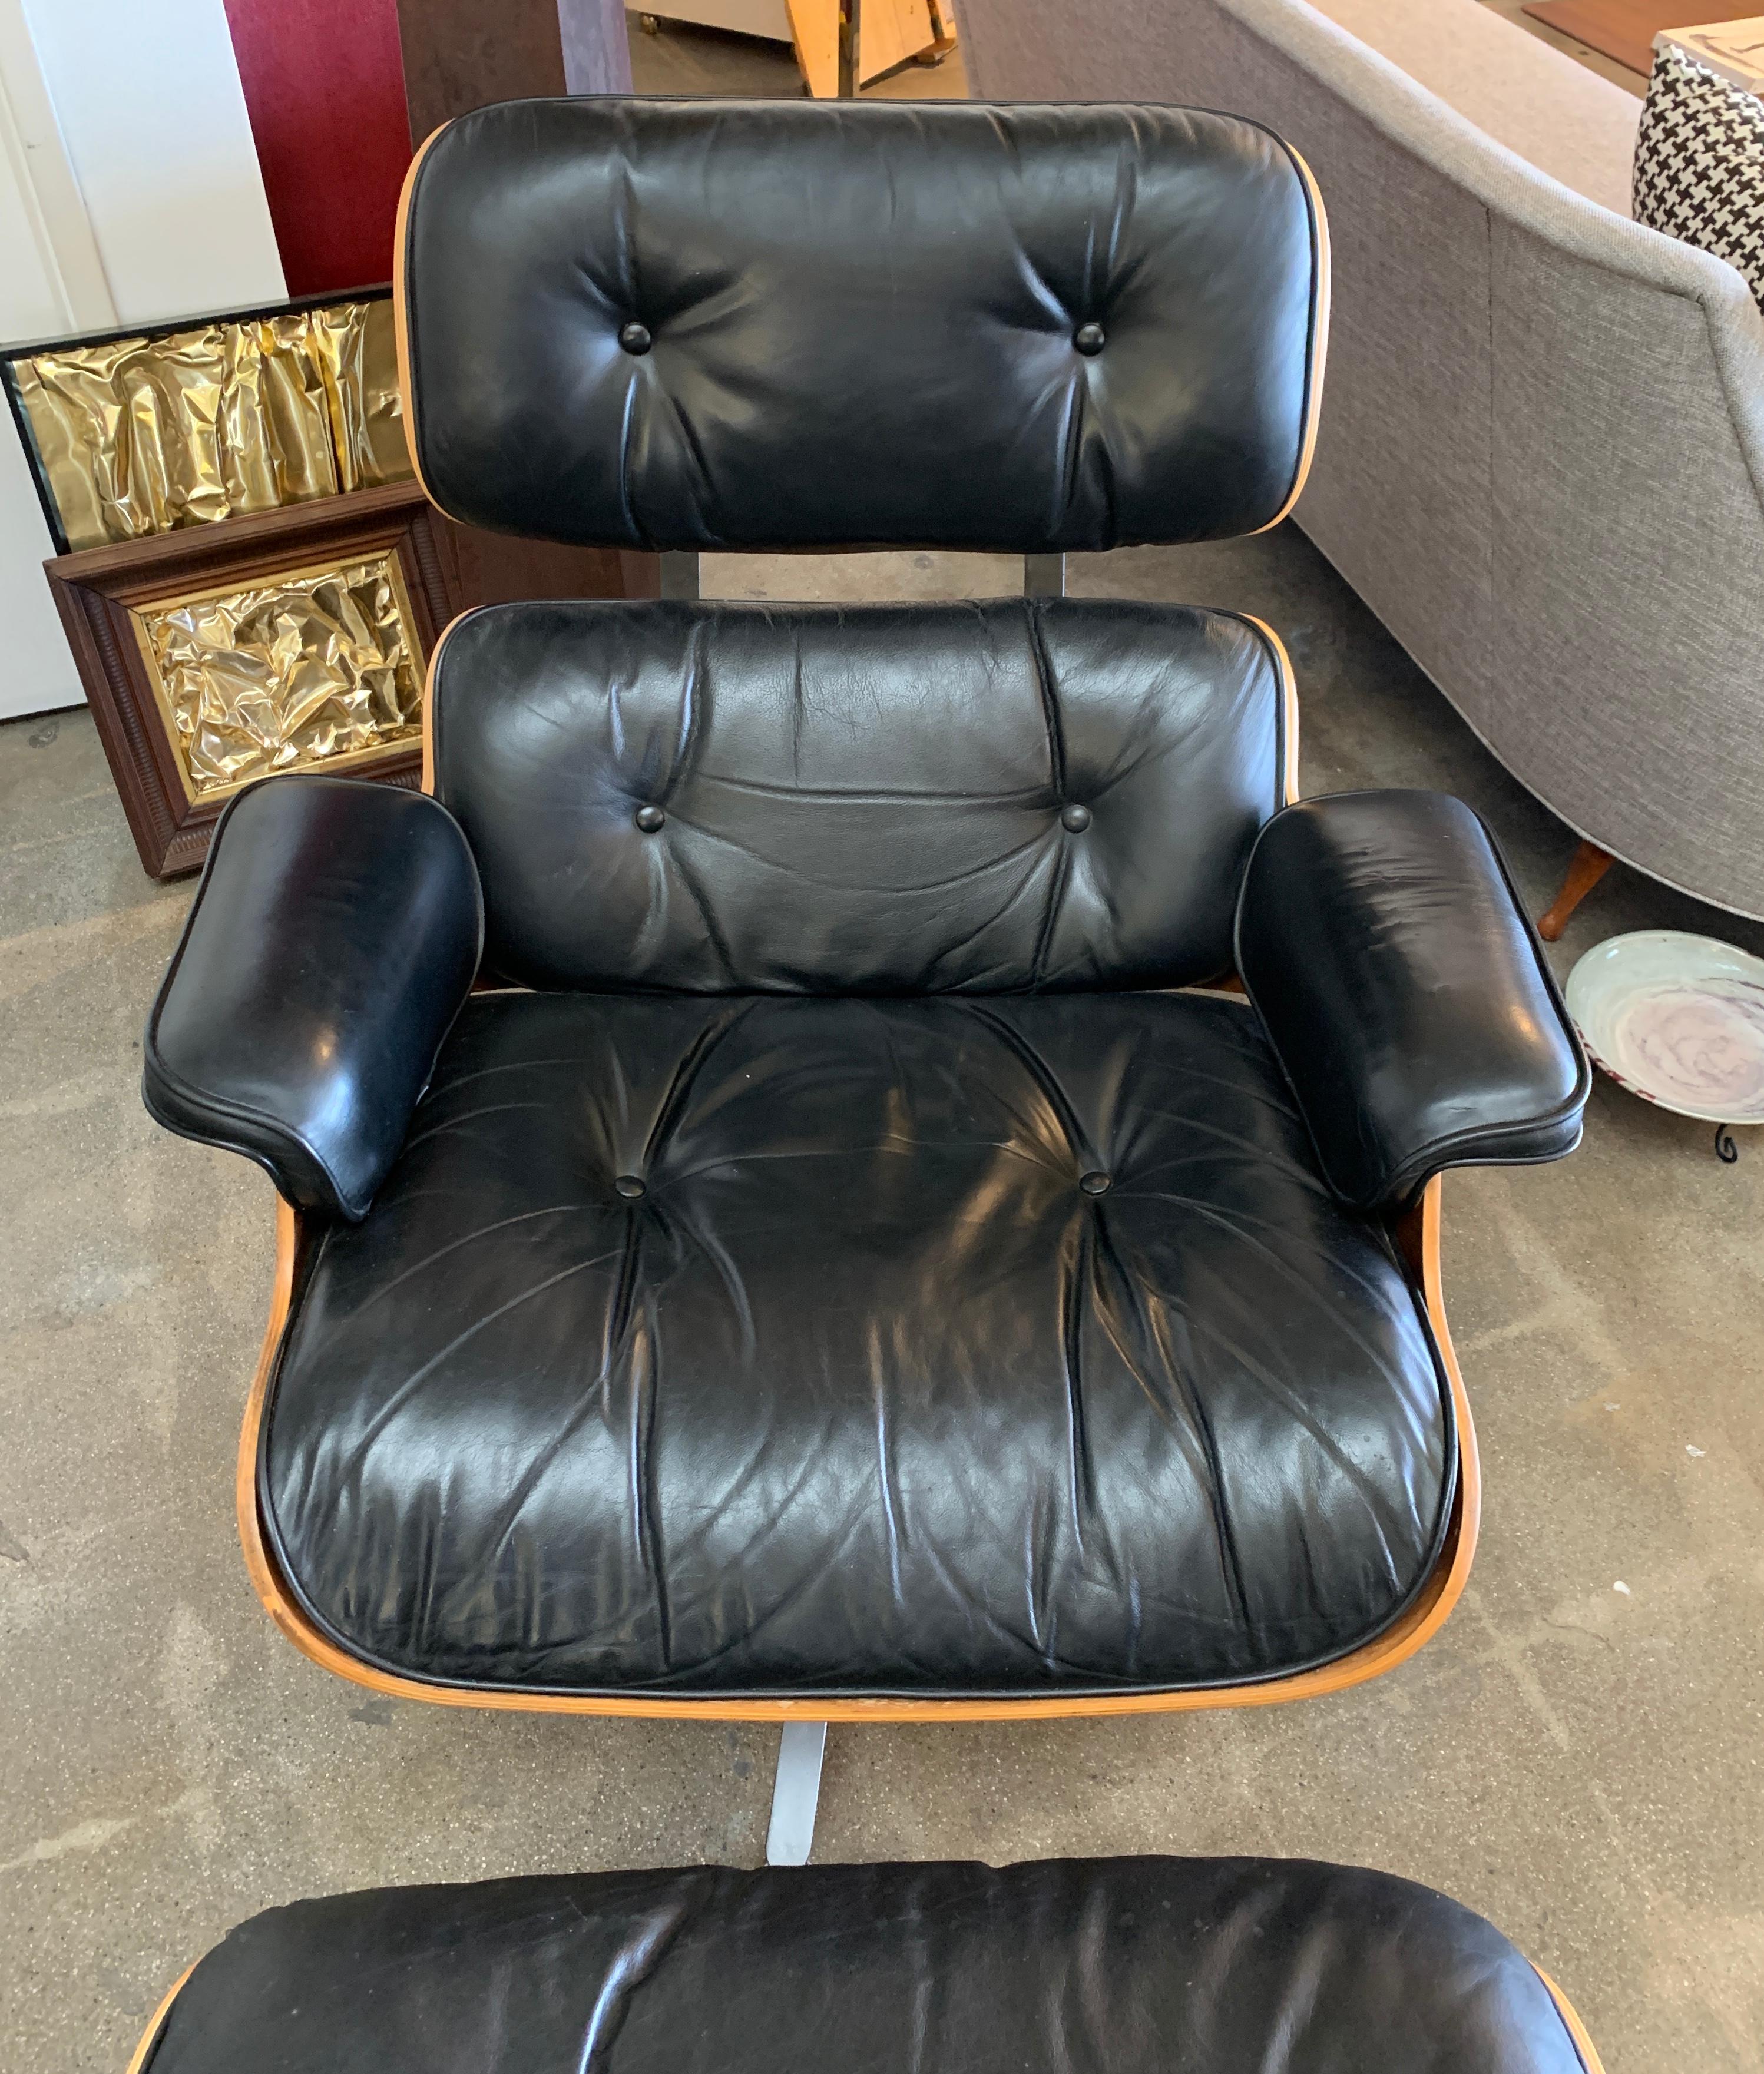 A 2006 labeled Eames lounge chair and ottoman by Herman Miller. Both pieces have Herman Miller tags and the chair has a Hume Modern Tag as well.This is the tall version at 33.5 inches tall at the back. It has presumably been restored at some point.